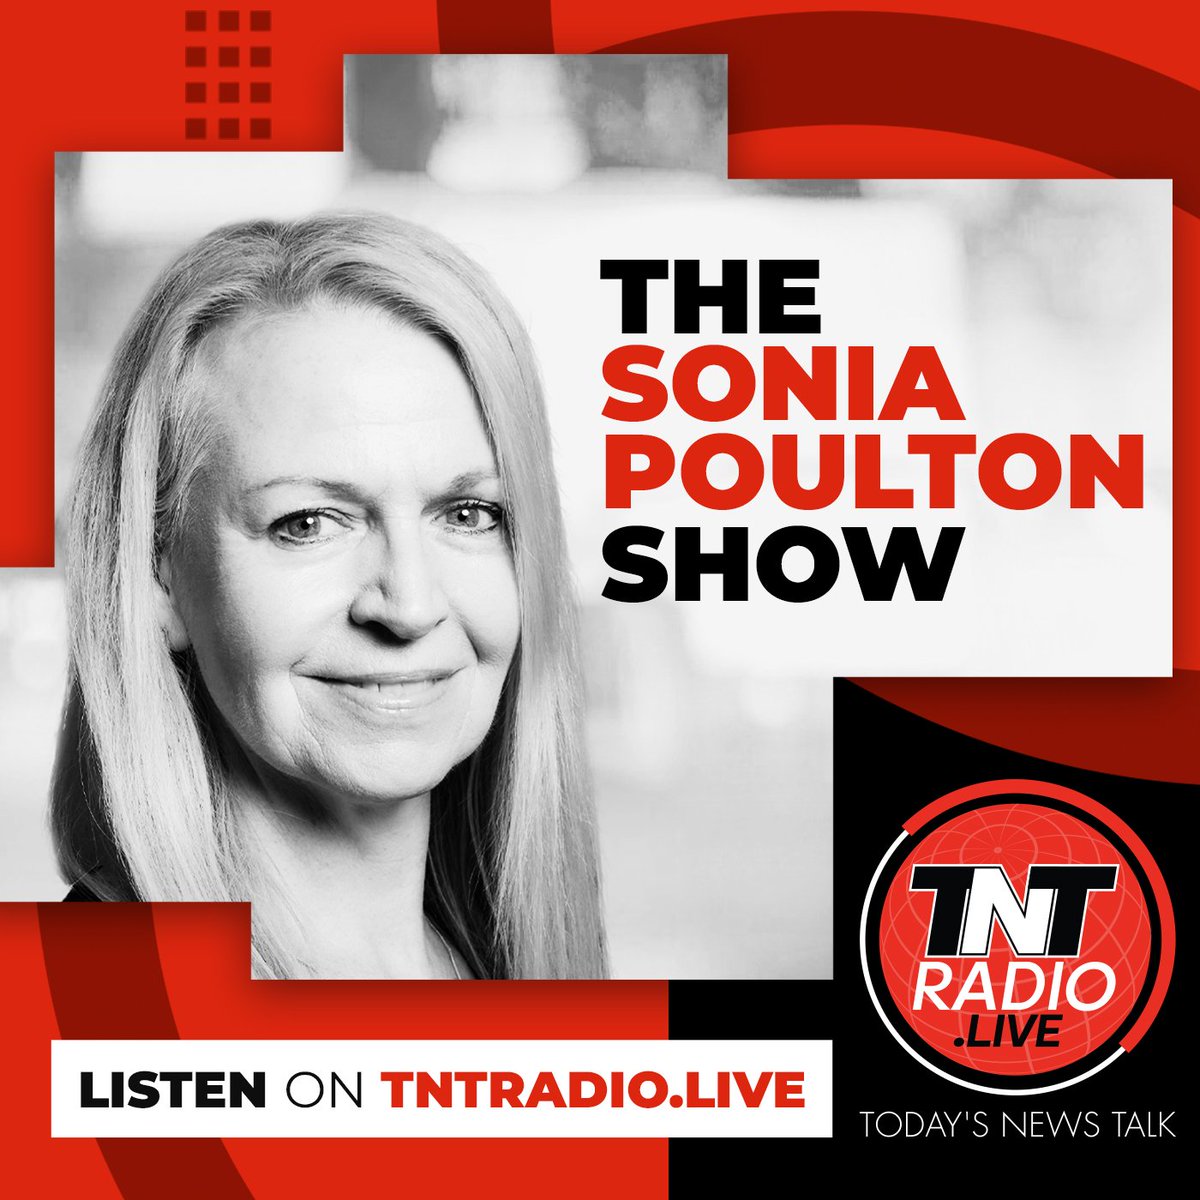 Today folks, I'm recommending you check out @SoniaPoulton and @tntradiolive between 8-10am. The world as it really is.....